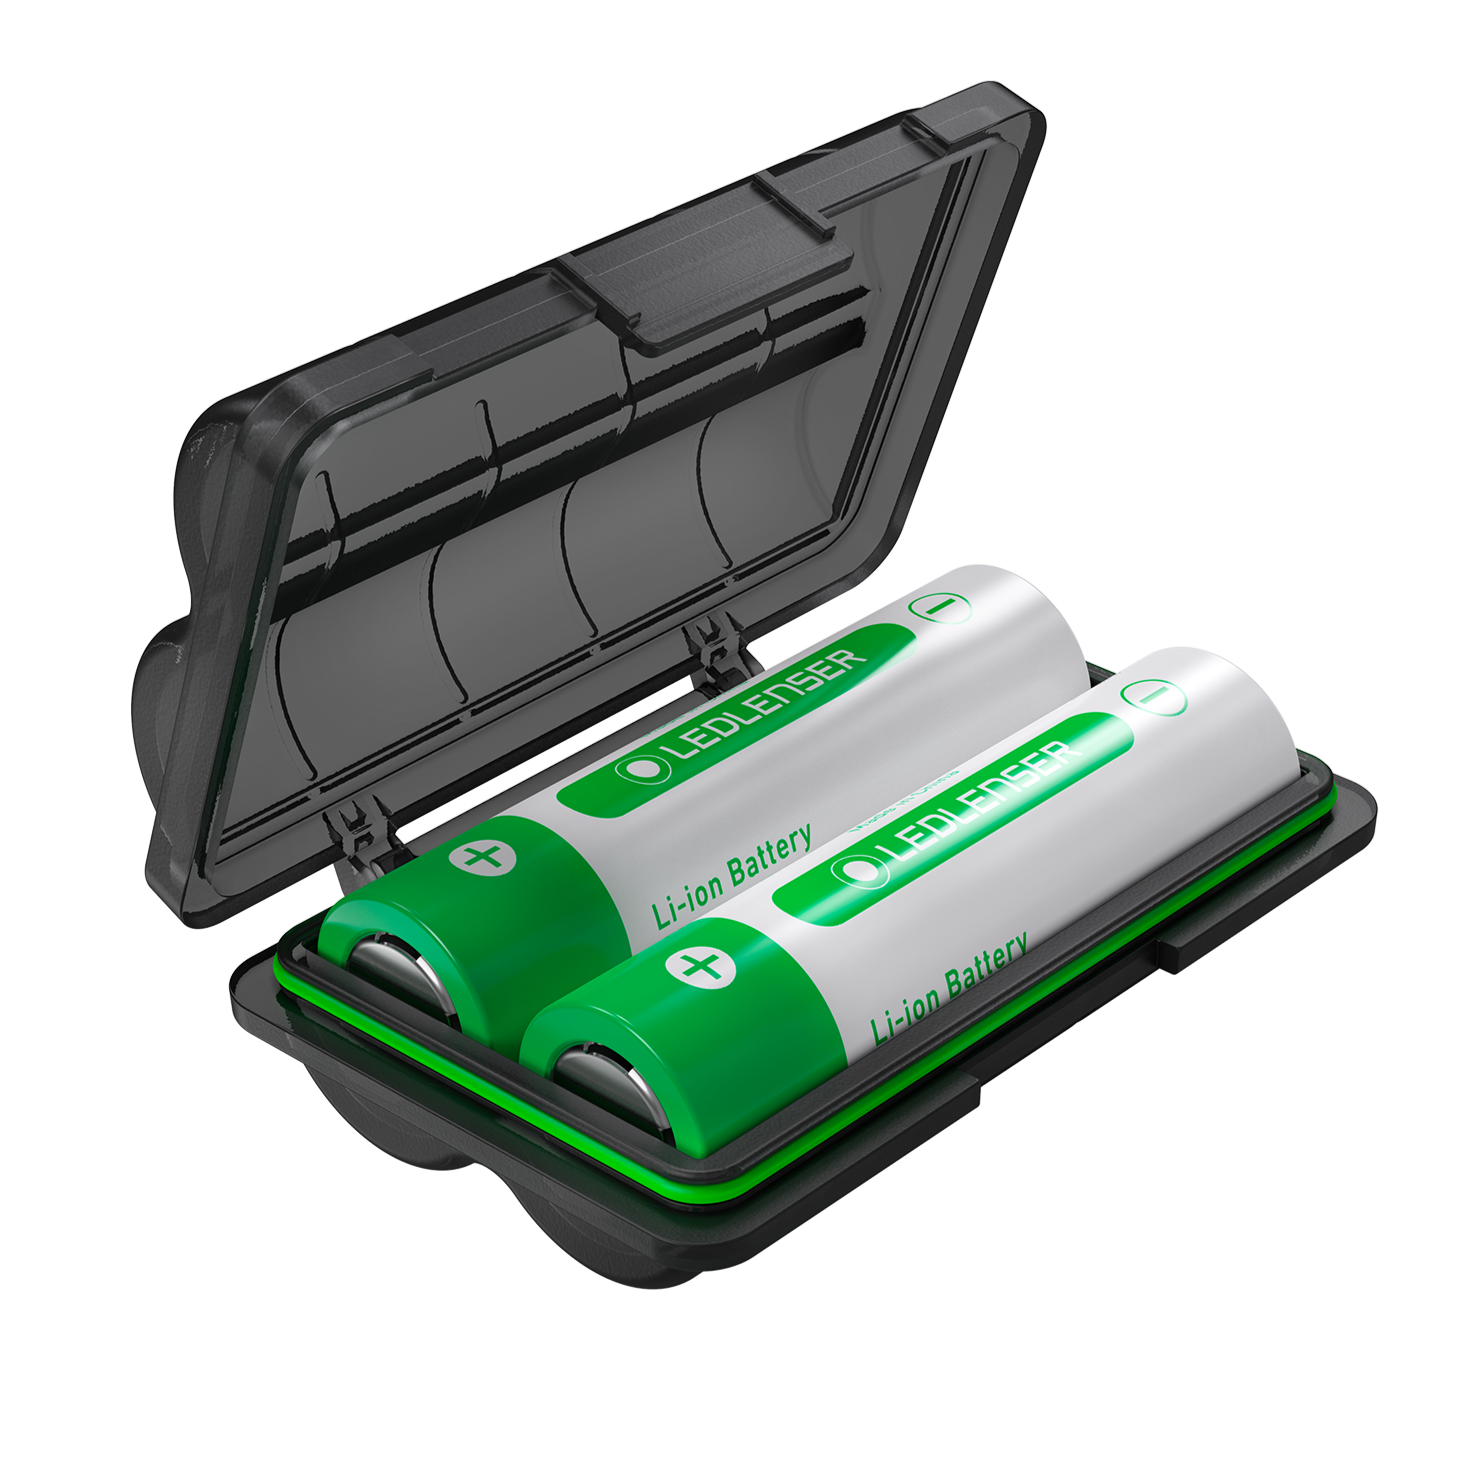 Protective BatteryBox7, Includes 2 x 18650 Batteries